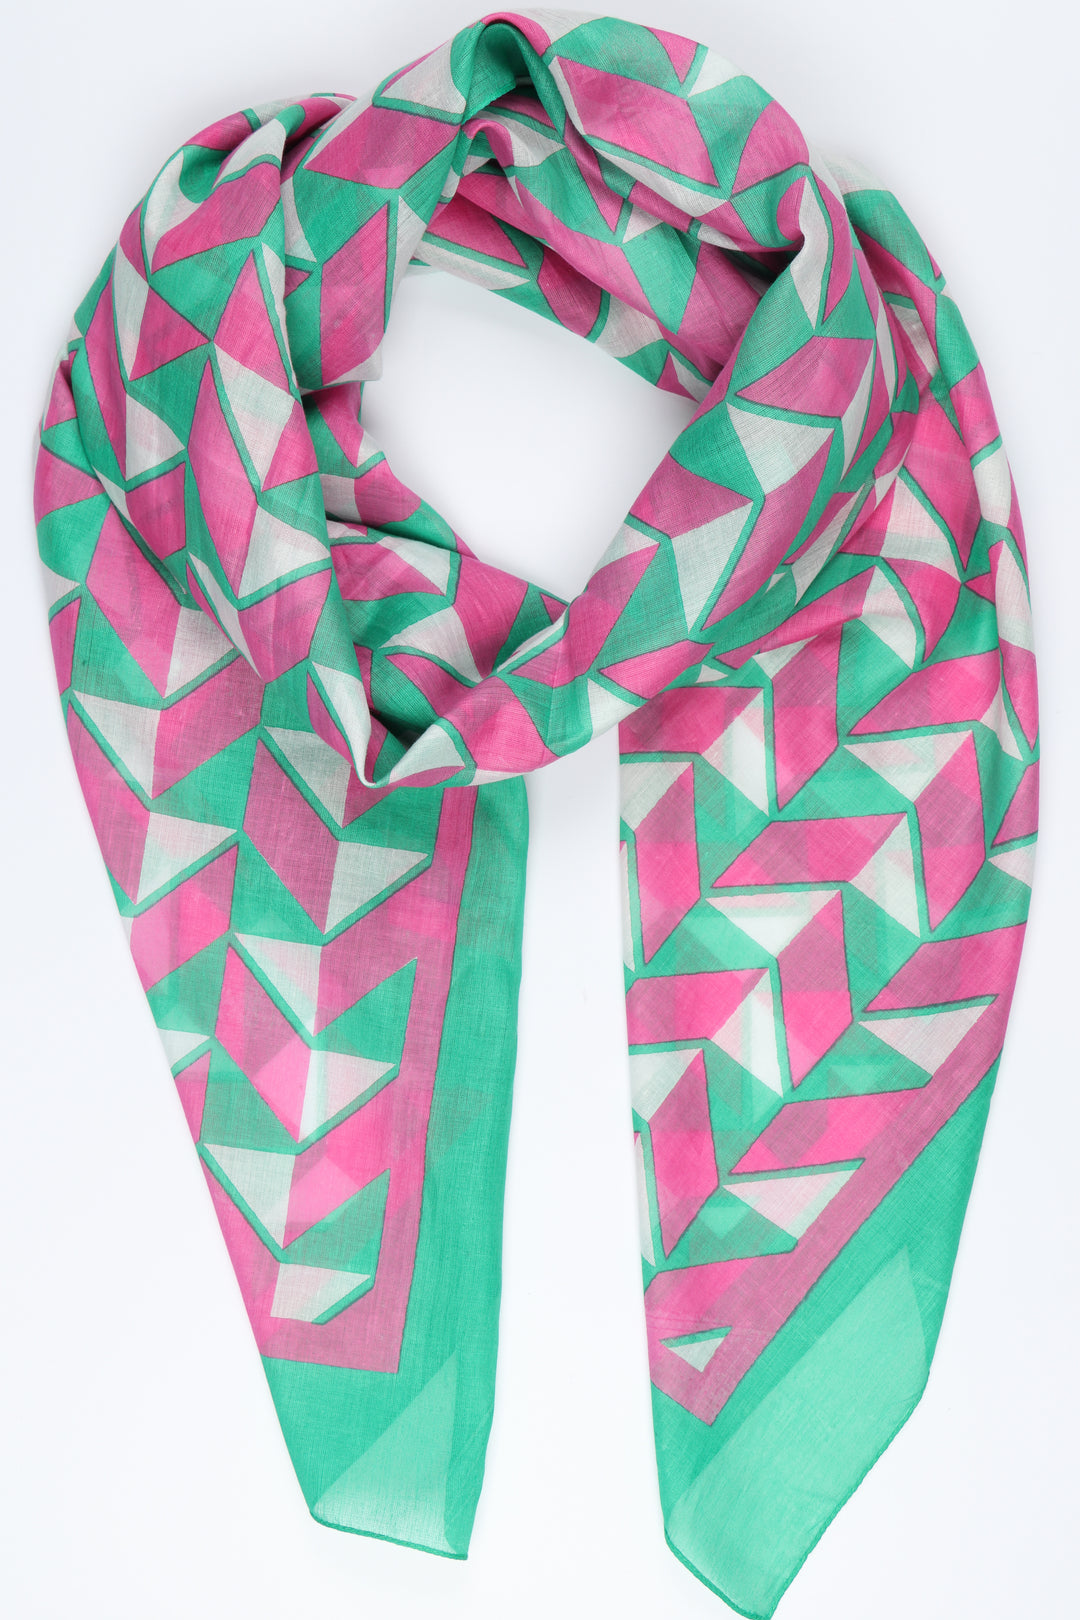 pink and green geometric print scarf with a green border trim